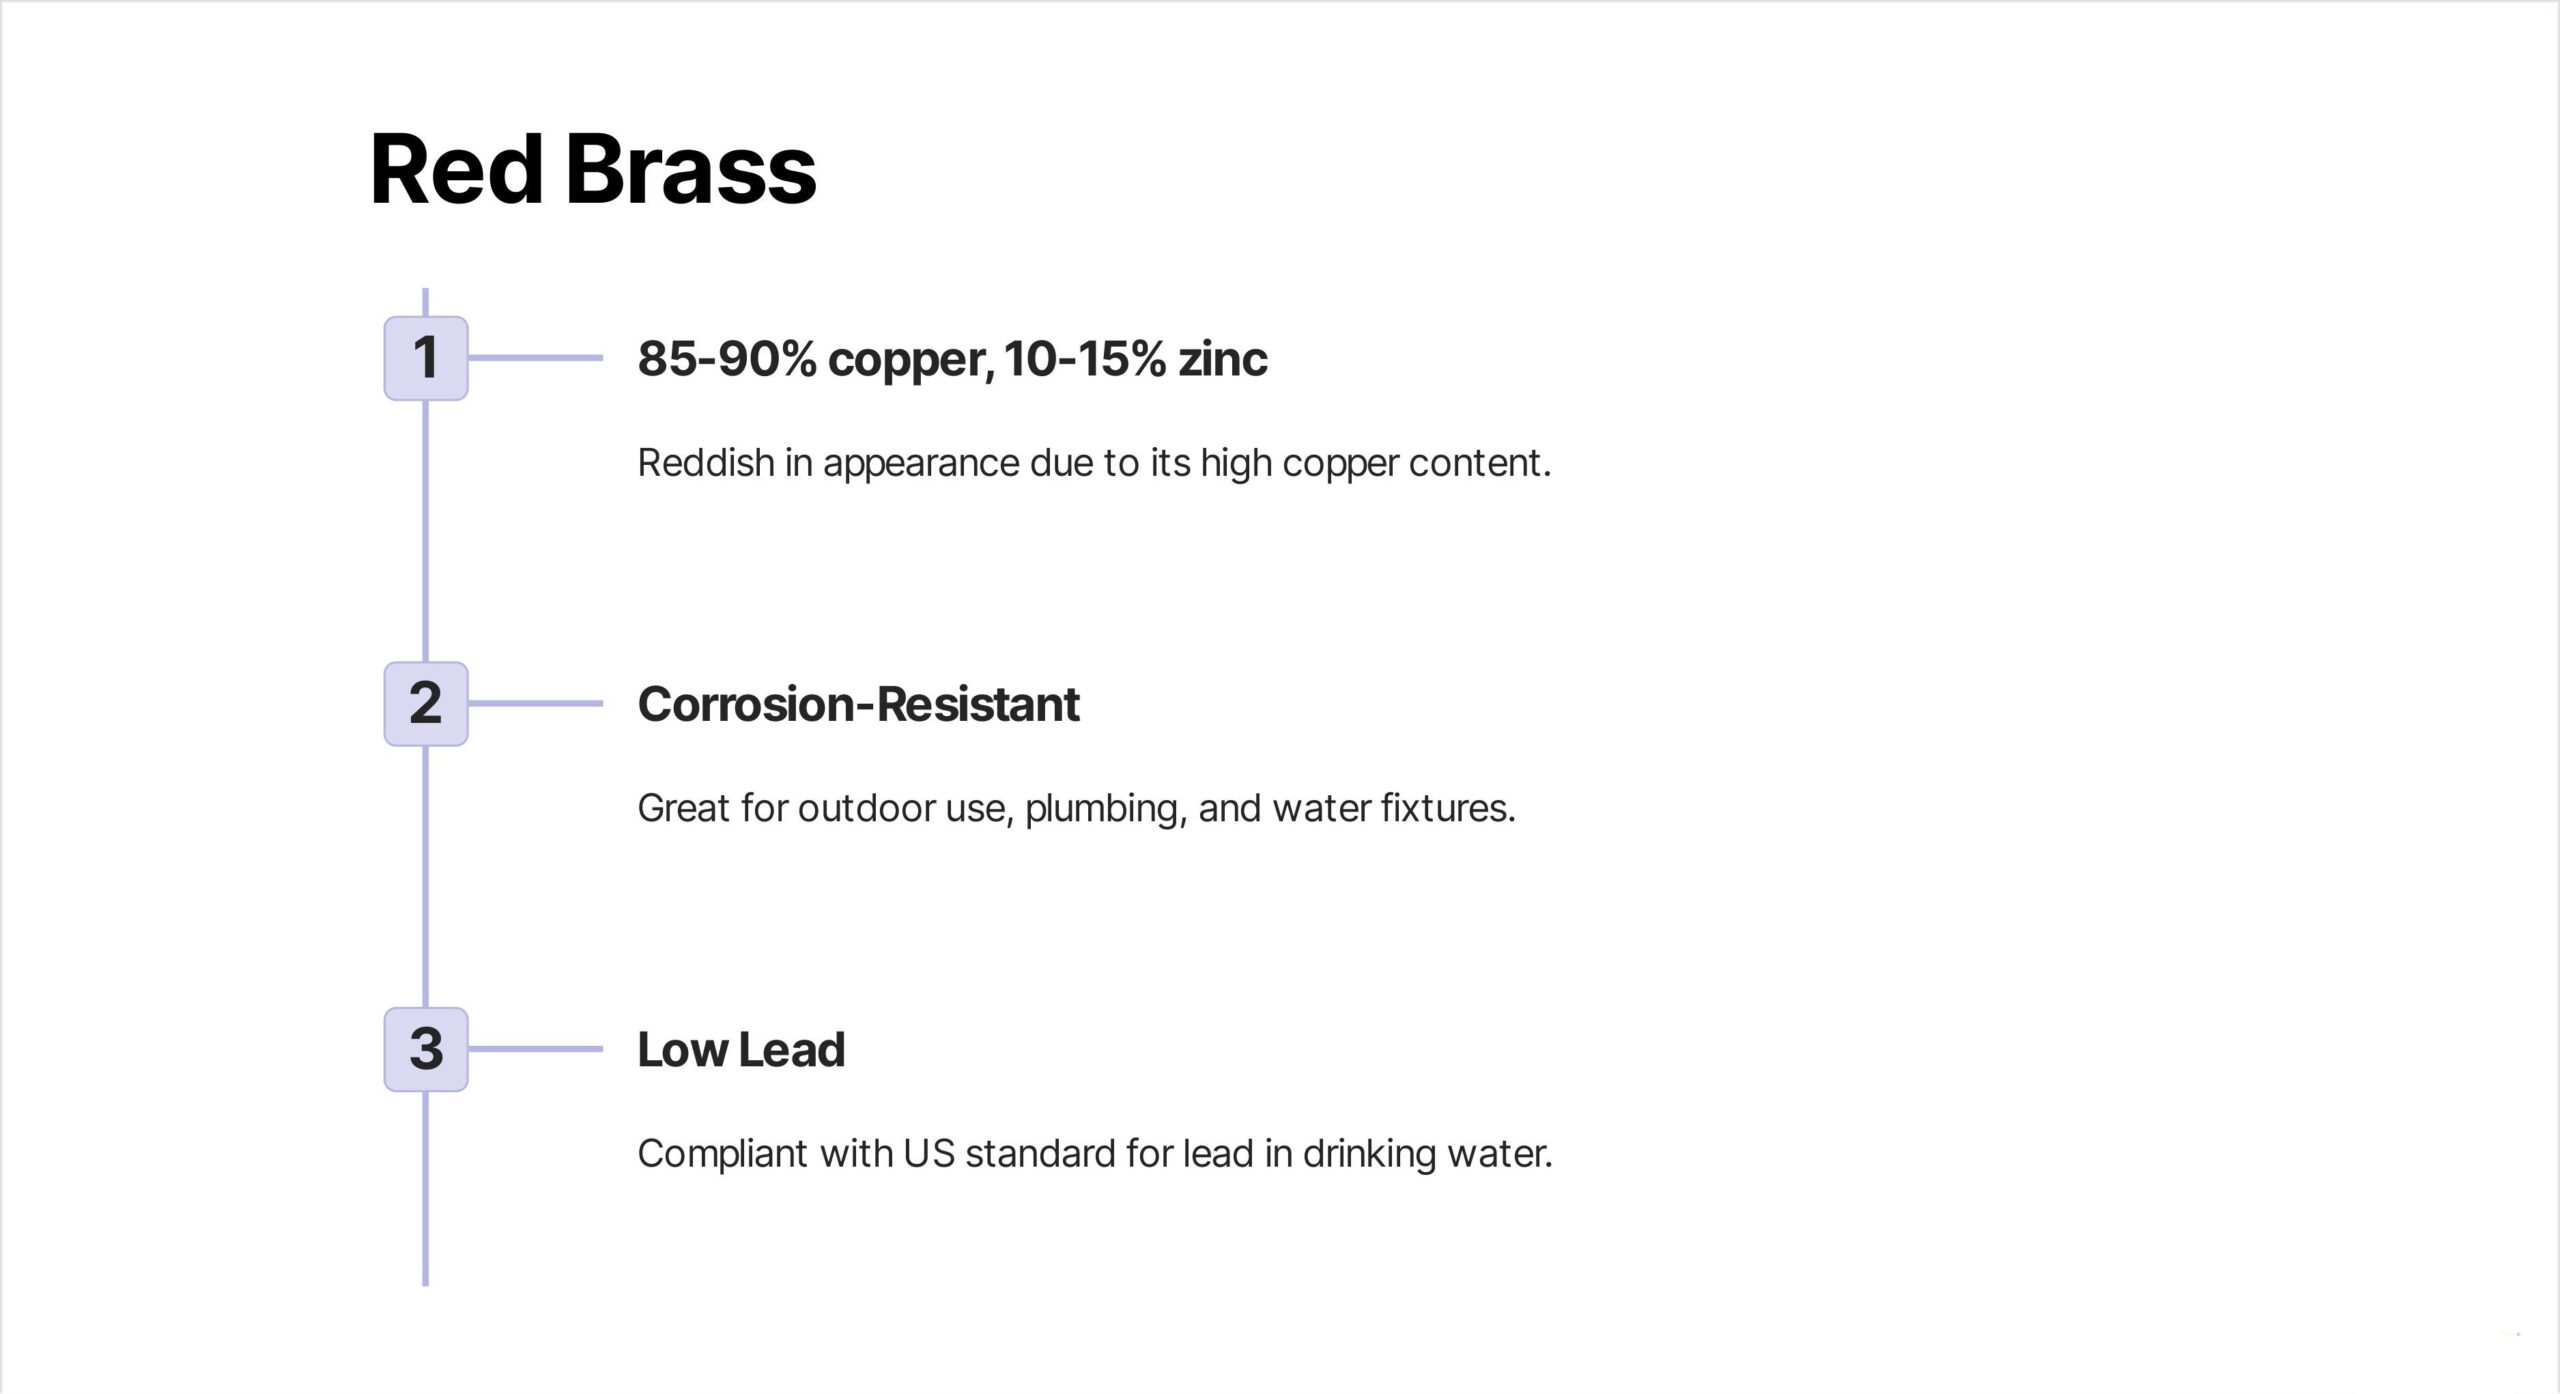 Red Brass – Properties and Uses